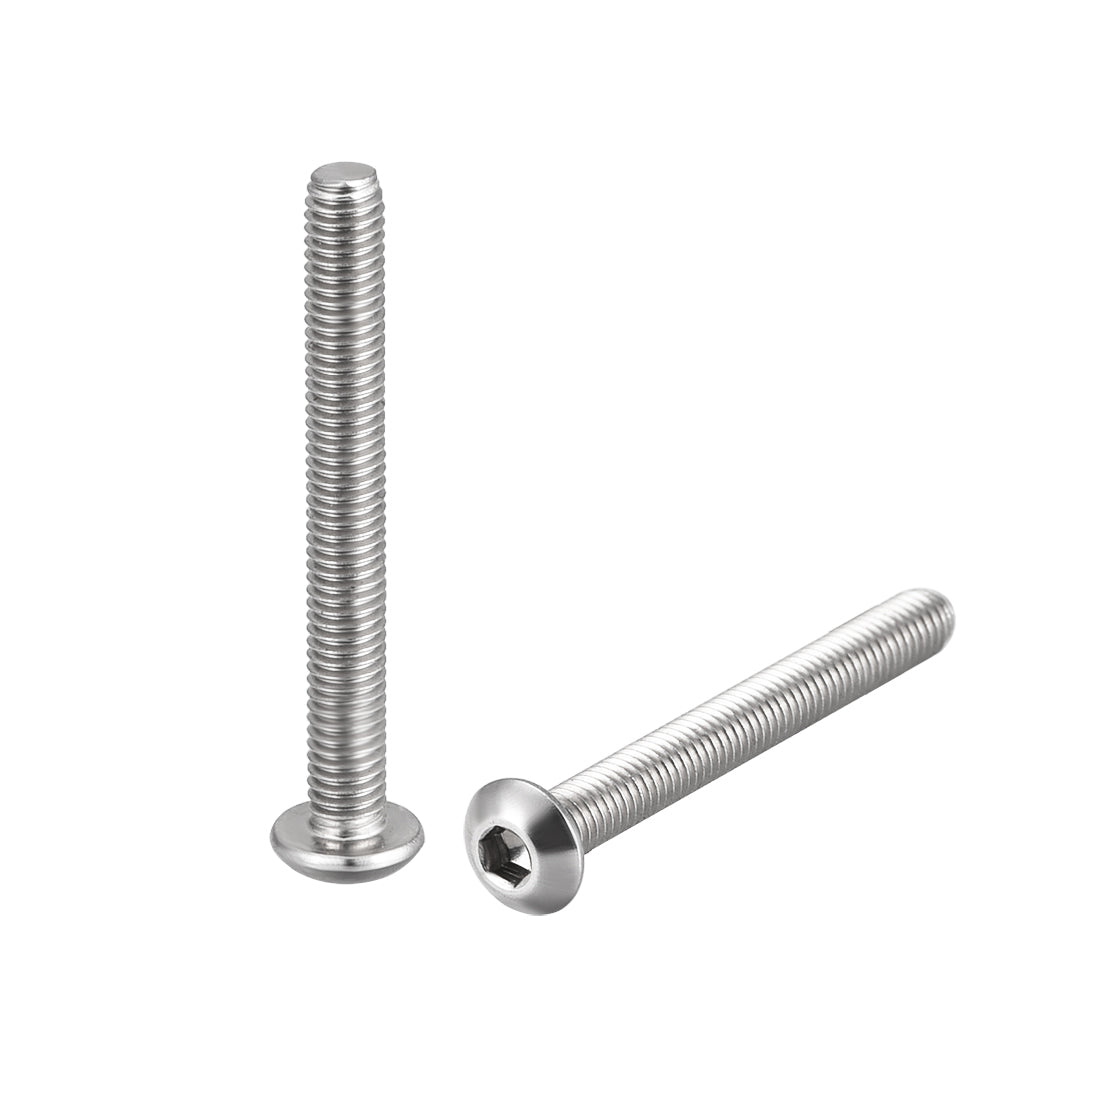 uxcell Uxcell M3x25mm Machine Screws Hex Socket Round Head Screw 304 Stainless Steel Fasteners Bolts 20pcs